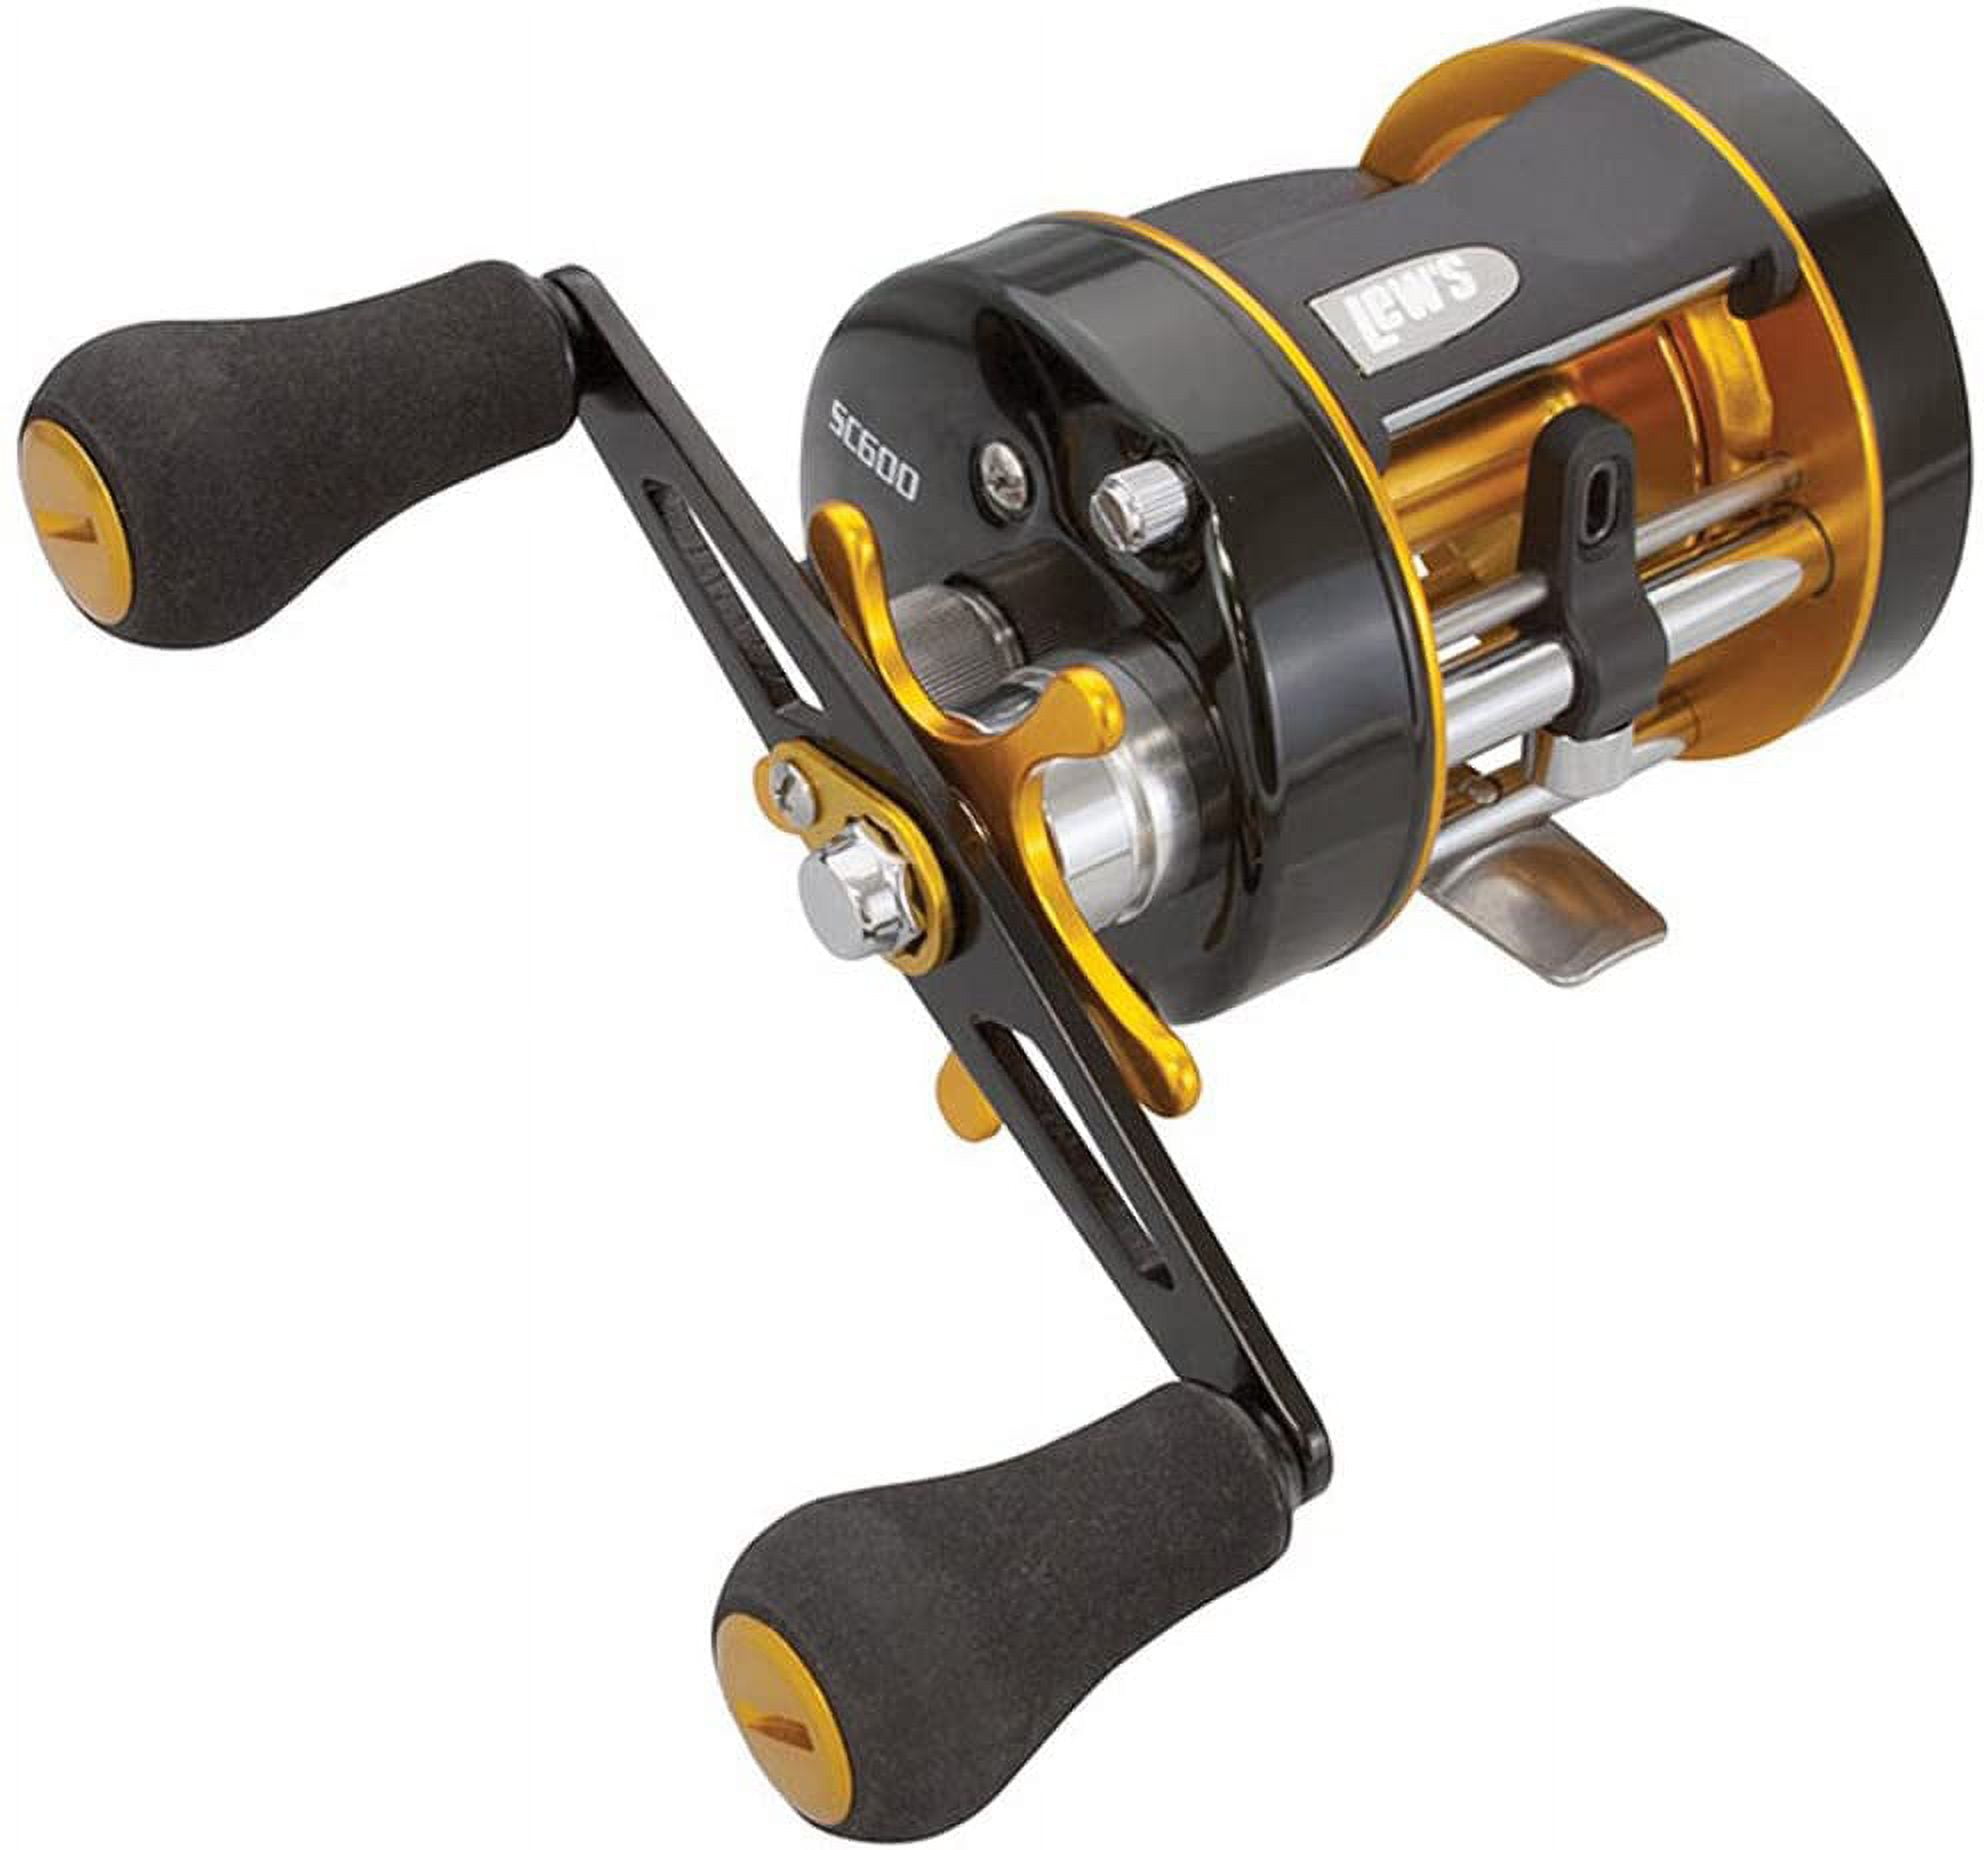 Fishing Pole And Reel, Lews Custom Xp Left Hand 7.5:1 Baitcasting Reel And  Abu Garcia Vertas Bait Caster Rod for Sale in Colorado Springs, CO 